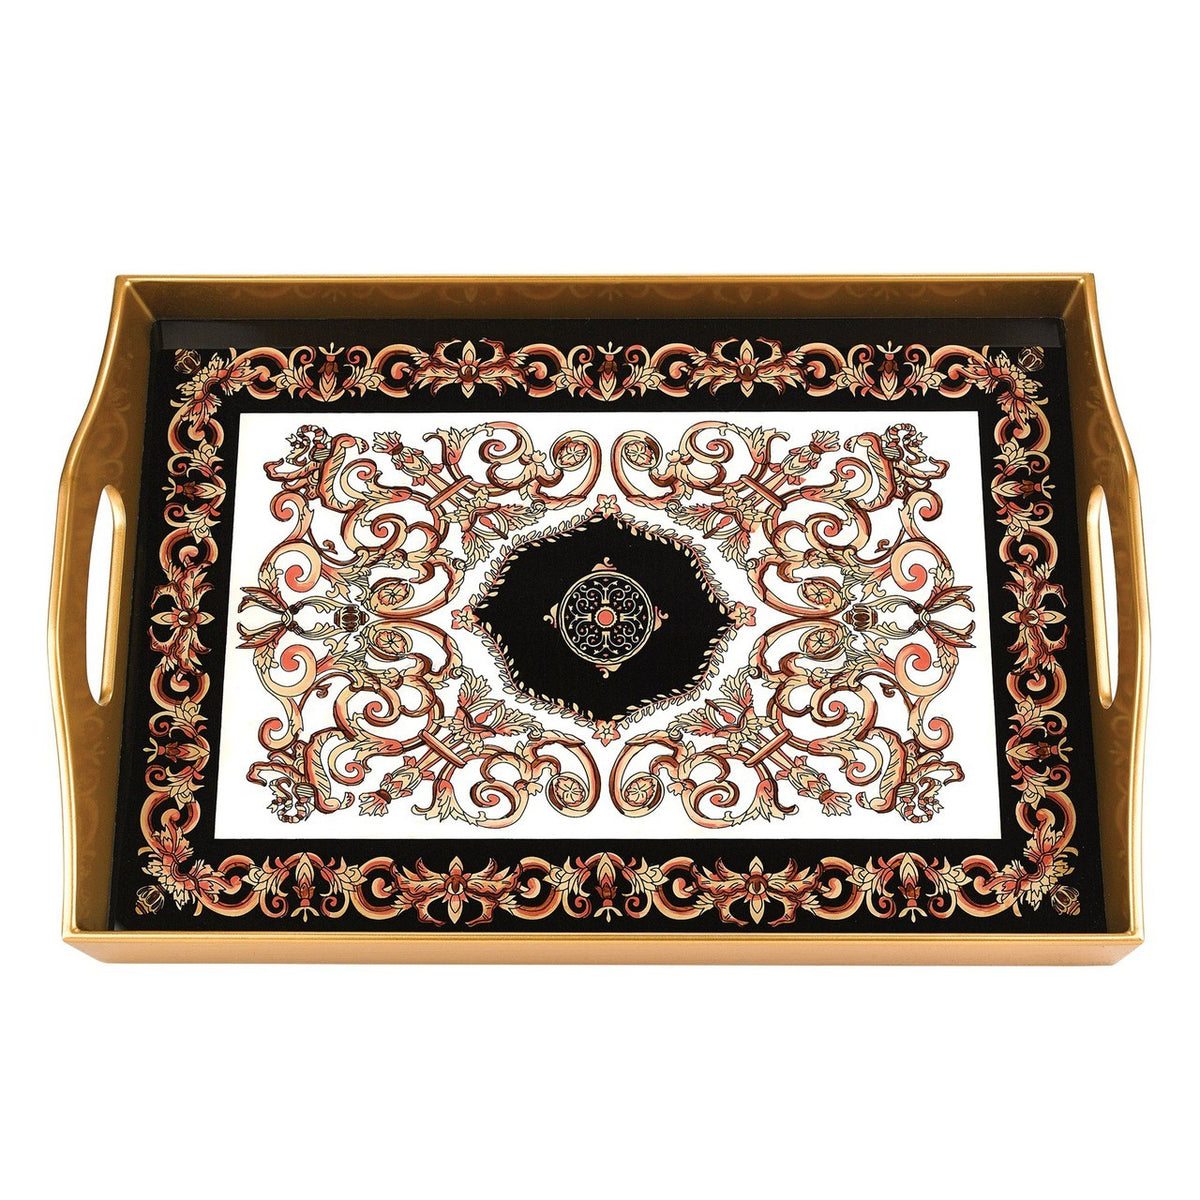 Empire Eglimose Reverse Hand Painted Glass Tray